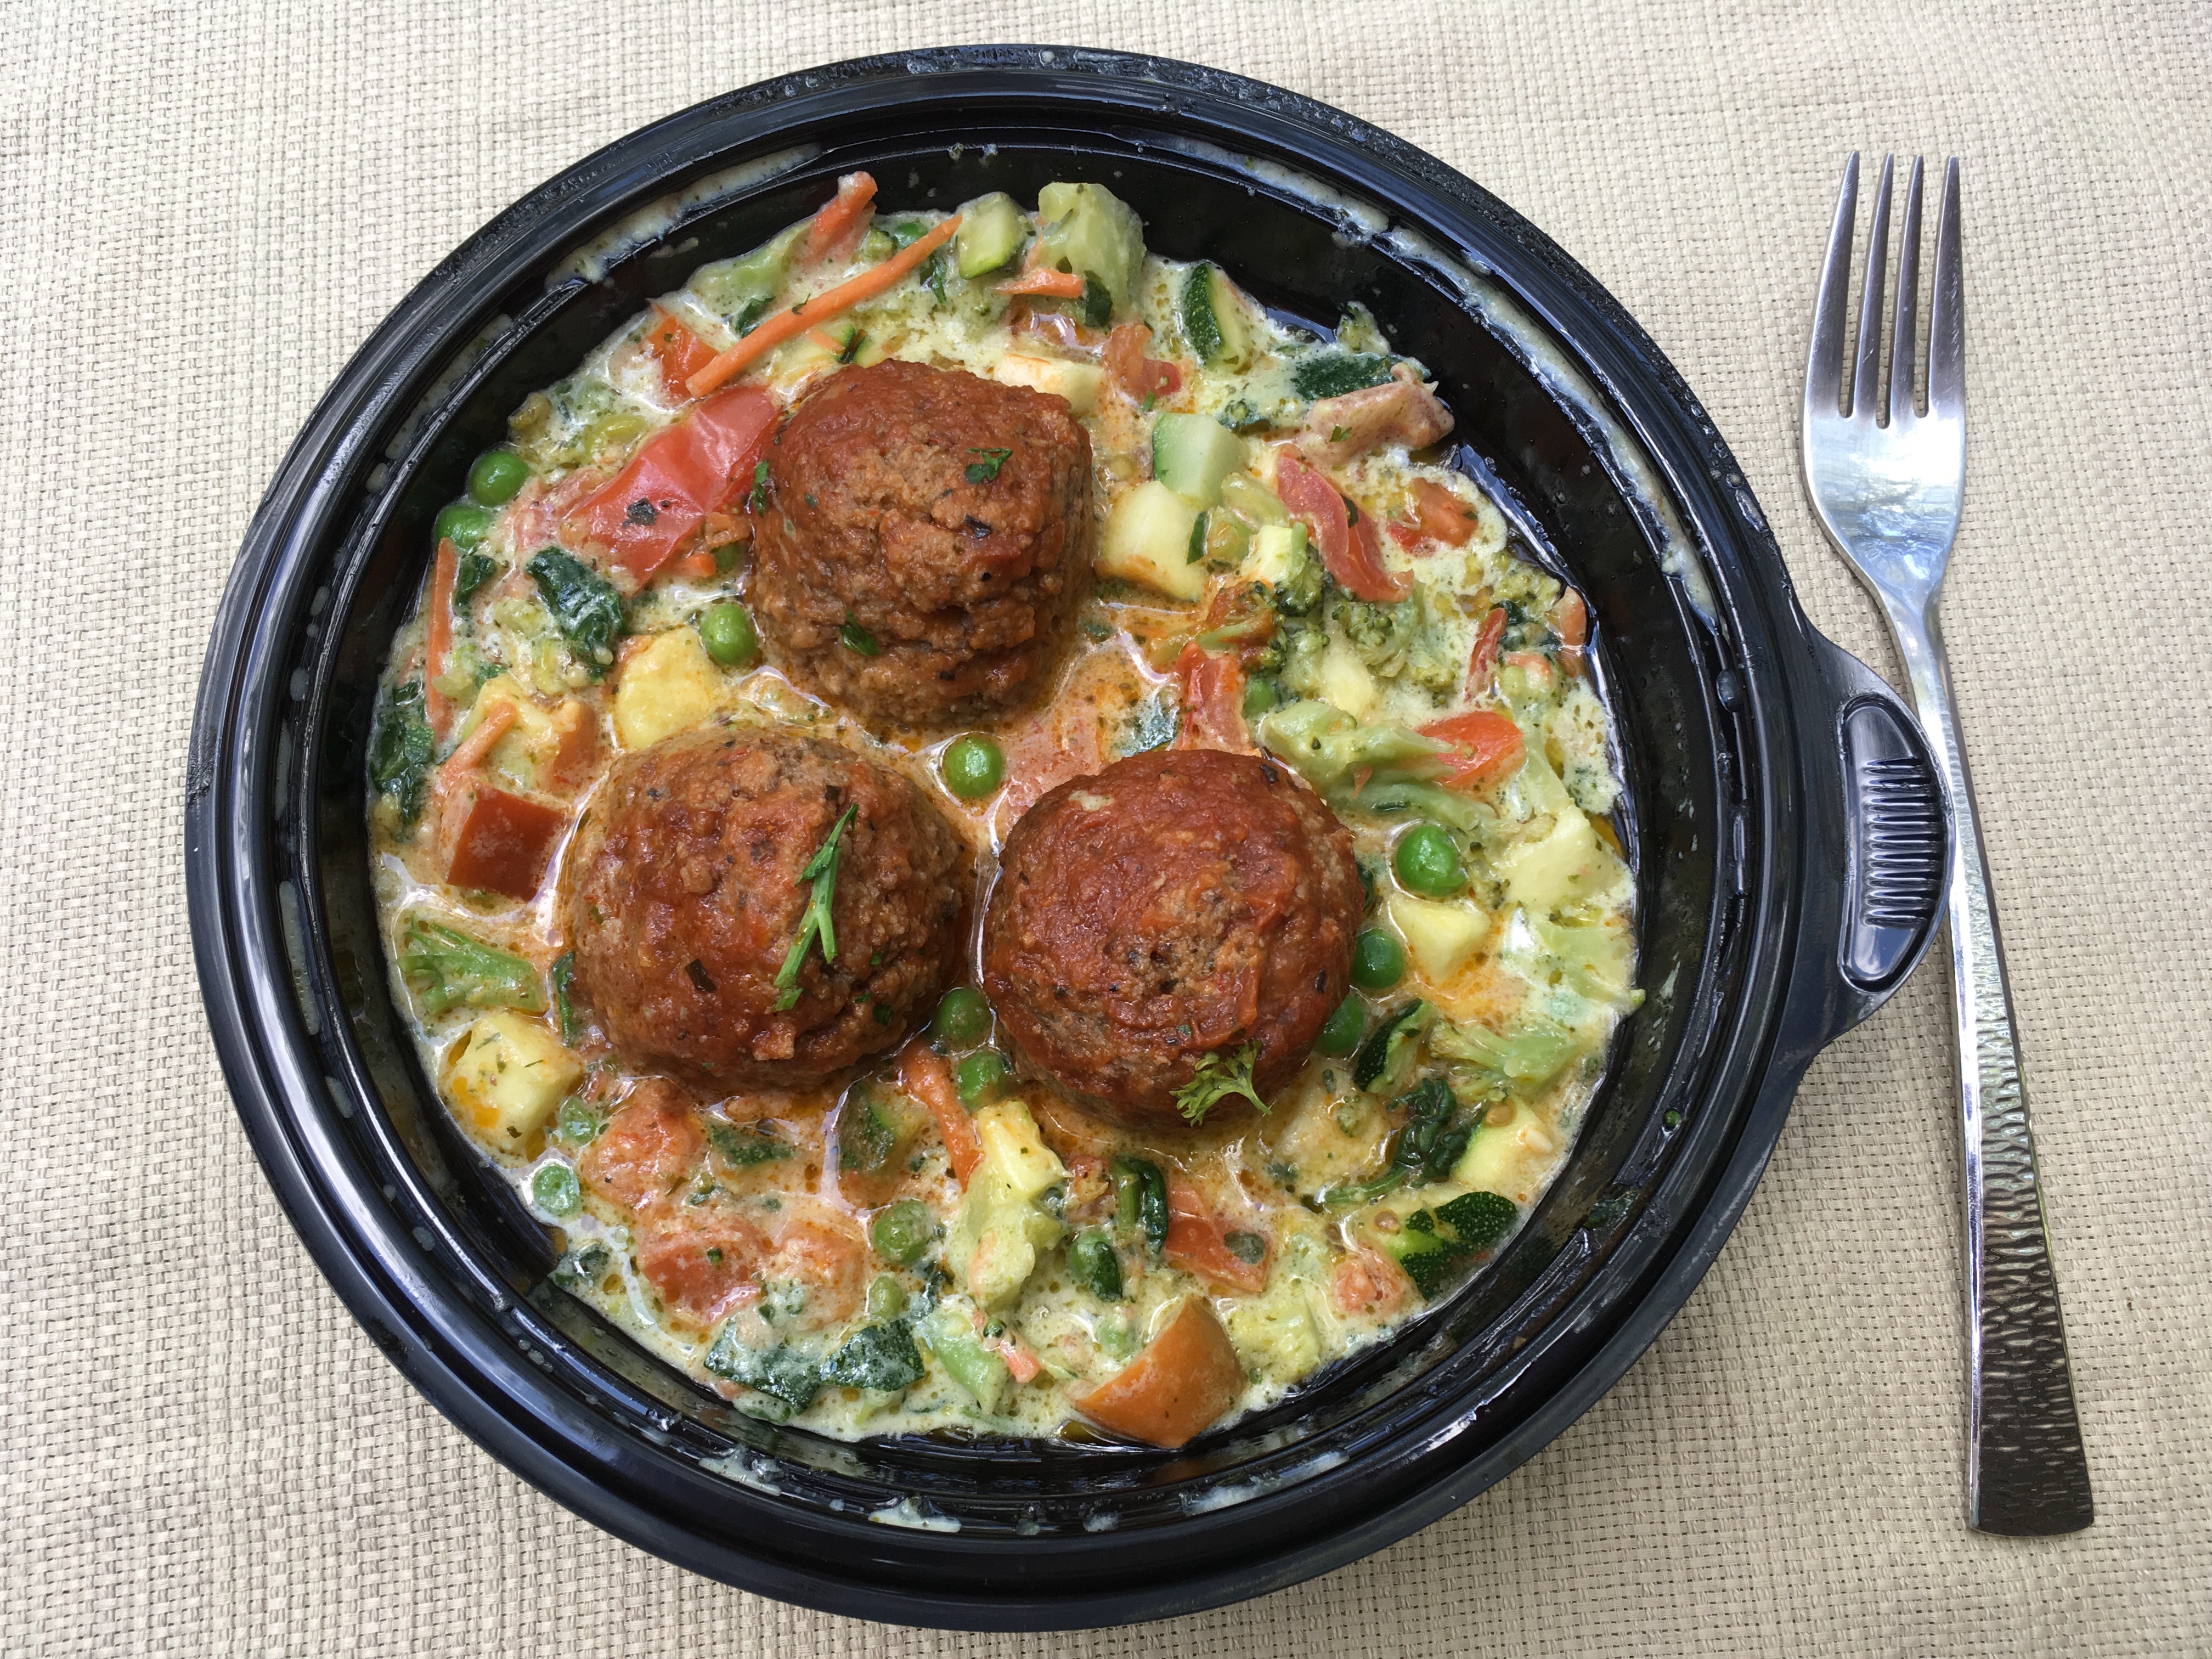 Low Carb Olive Garden Meatballs and Veggies